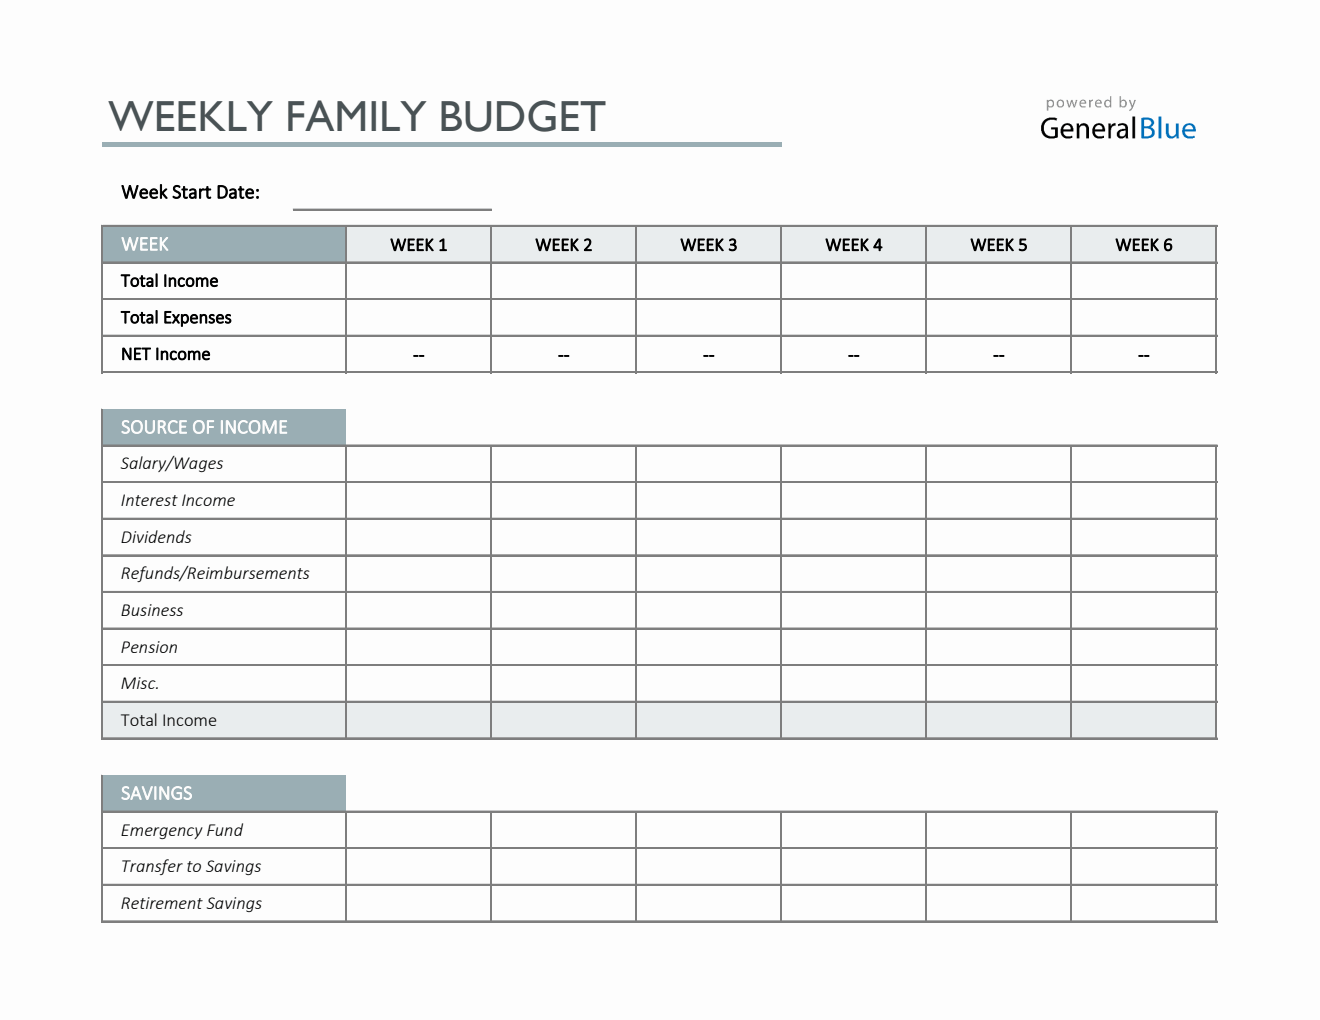 Weekly Family Budget Template in Excel